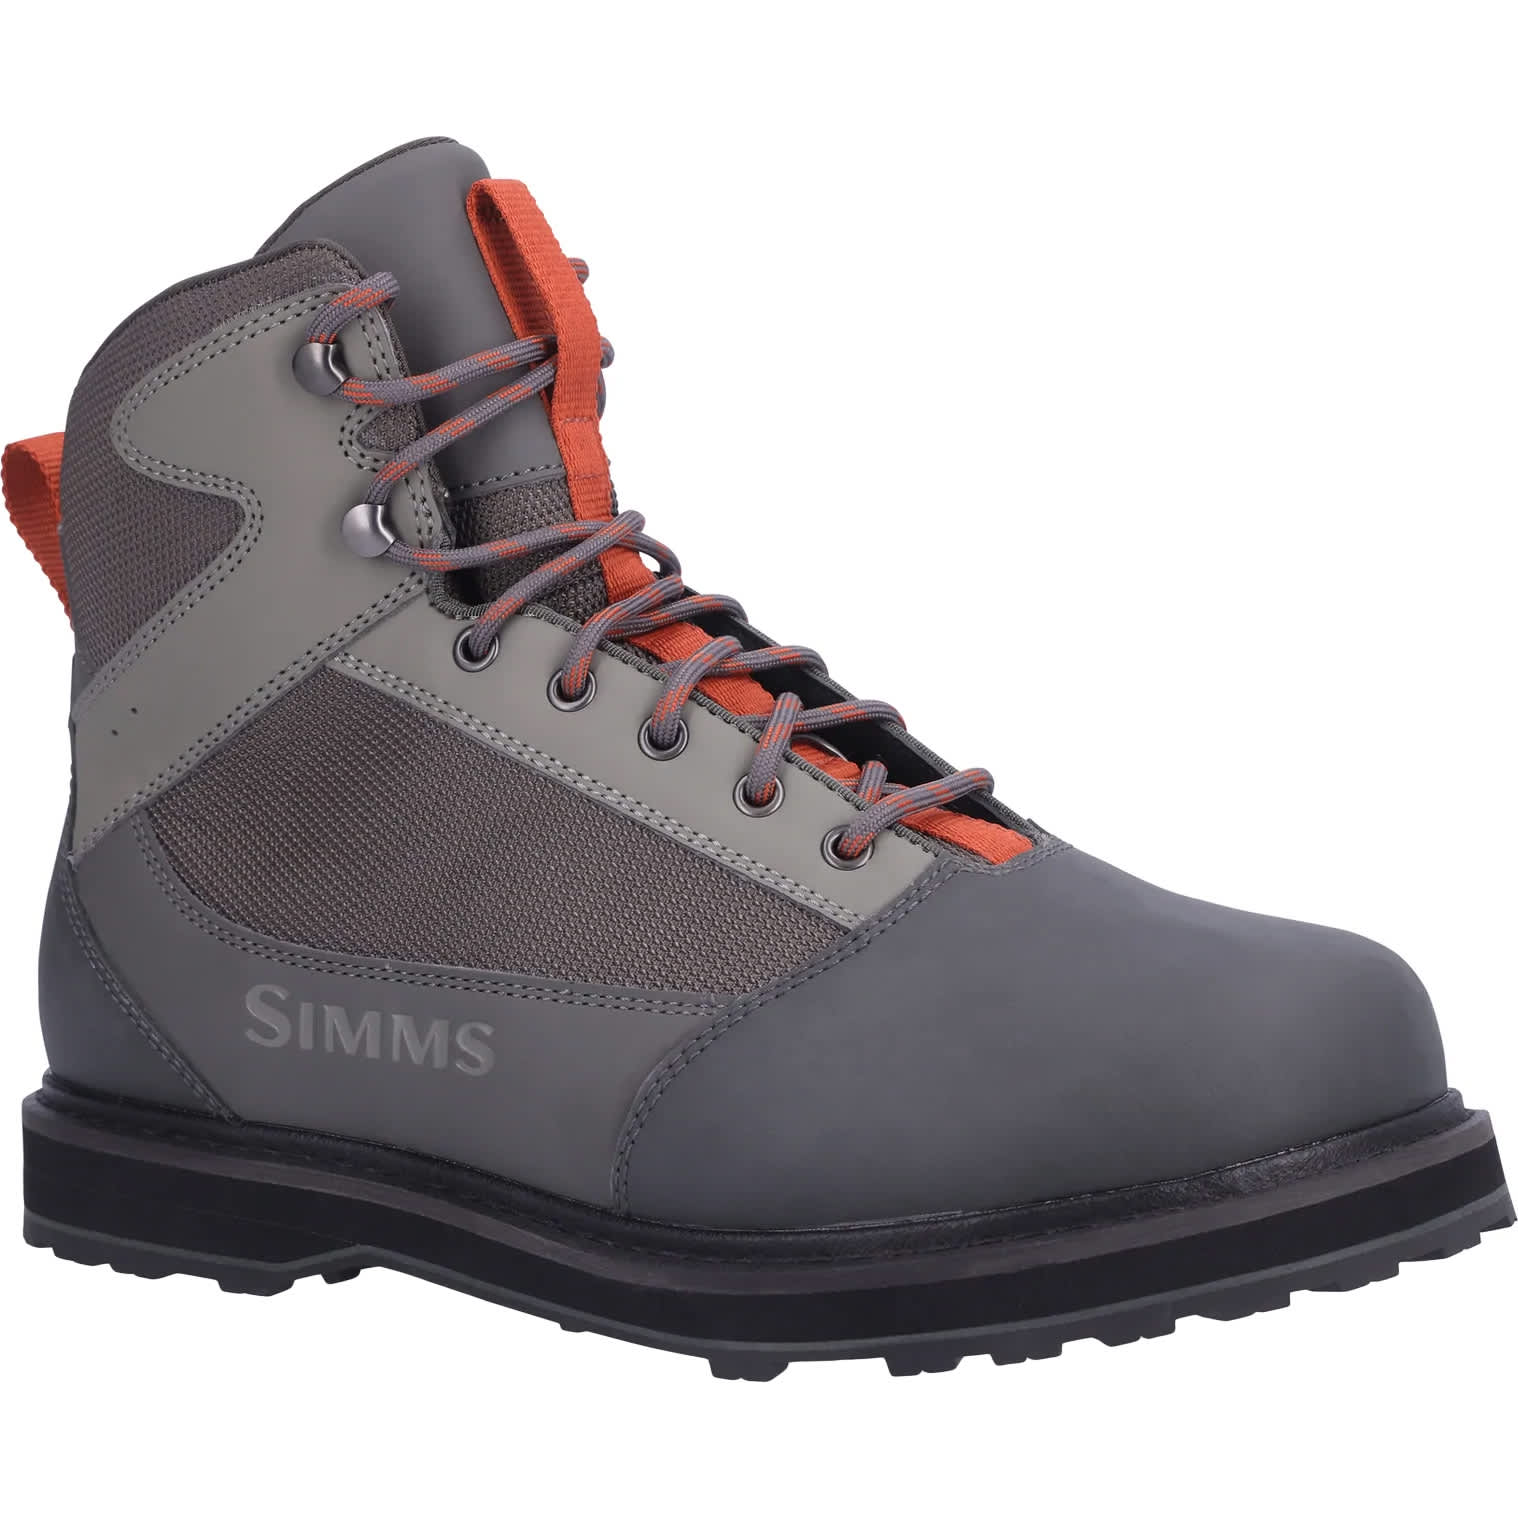 Simms Tributary Wading Boot - Rubber 9 / Basalt